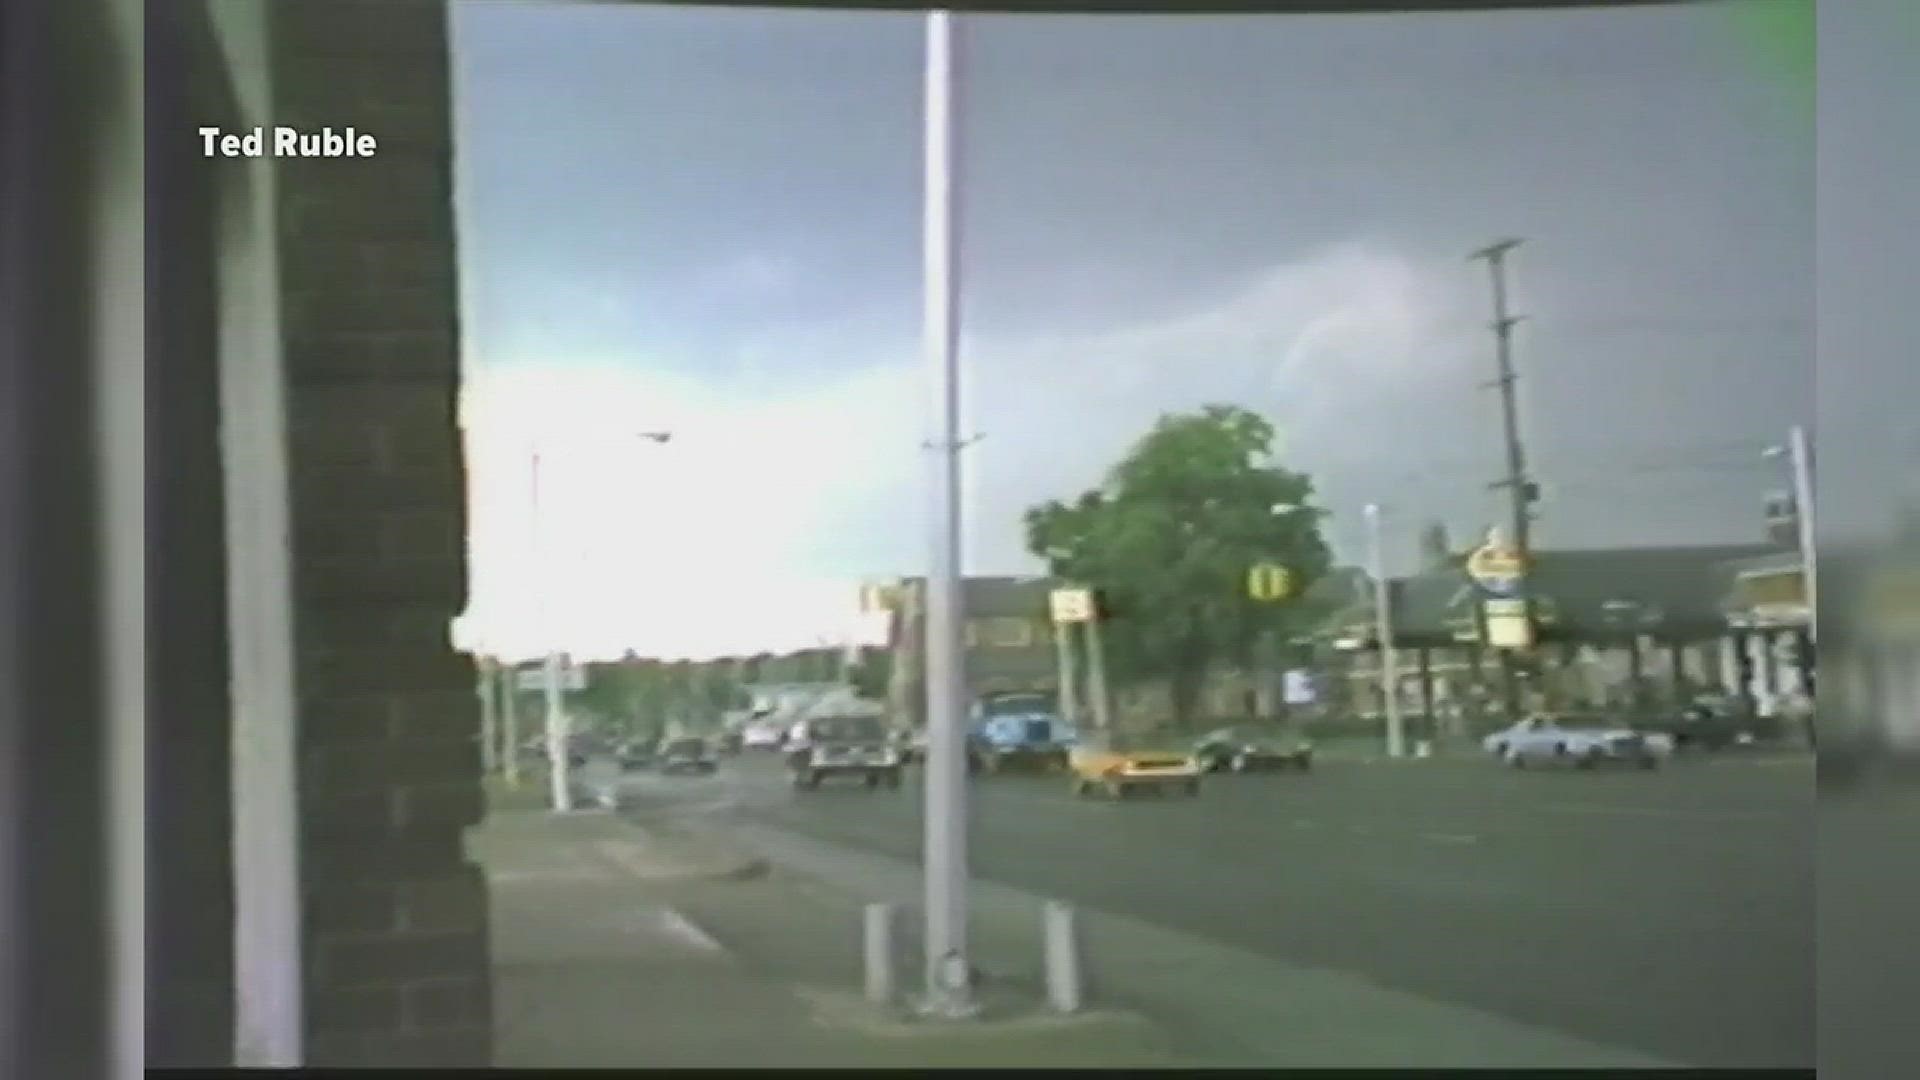 Ted Ruble was a 24-year-old employee at the "Sound Room" in downtown Kalamazoo the day the tornado hit. He grabbed his camera, and the rest is visual history.